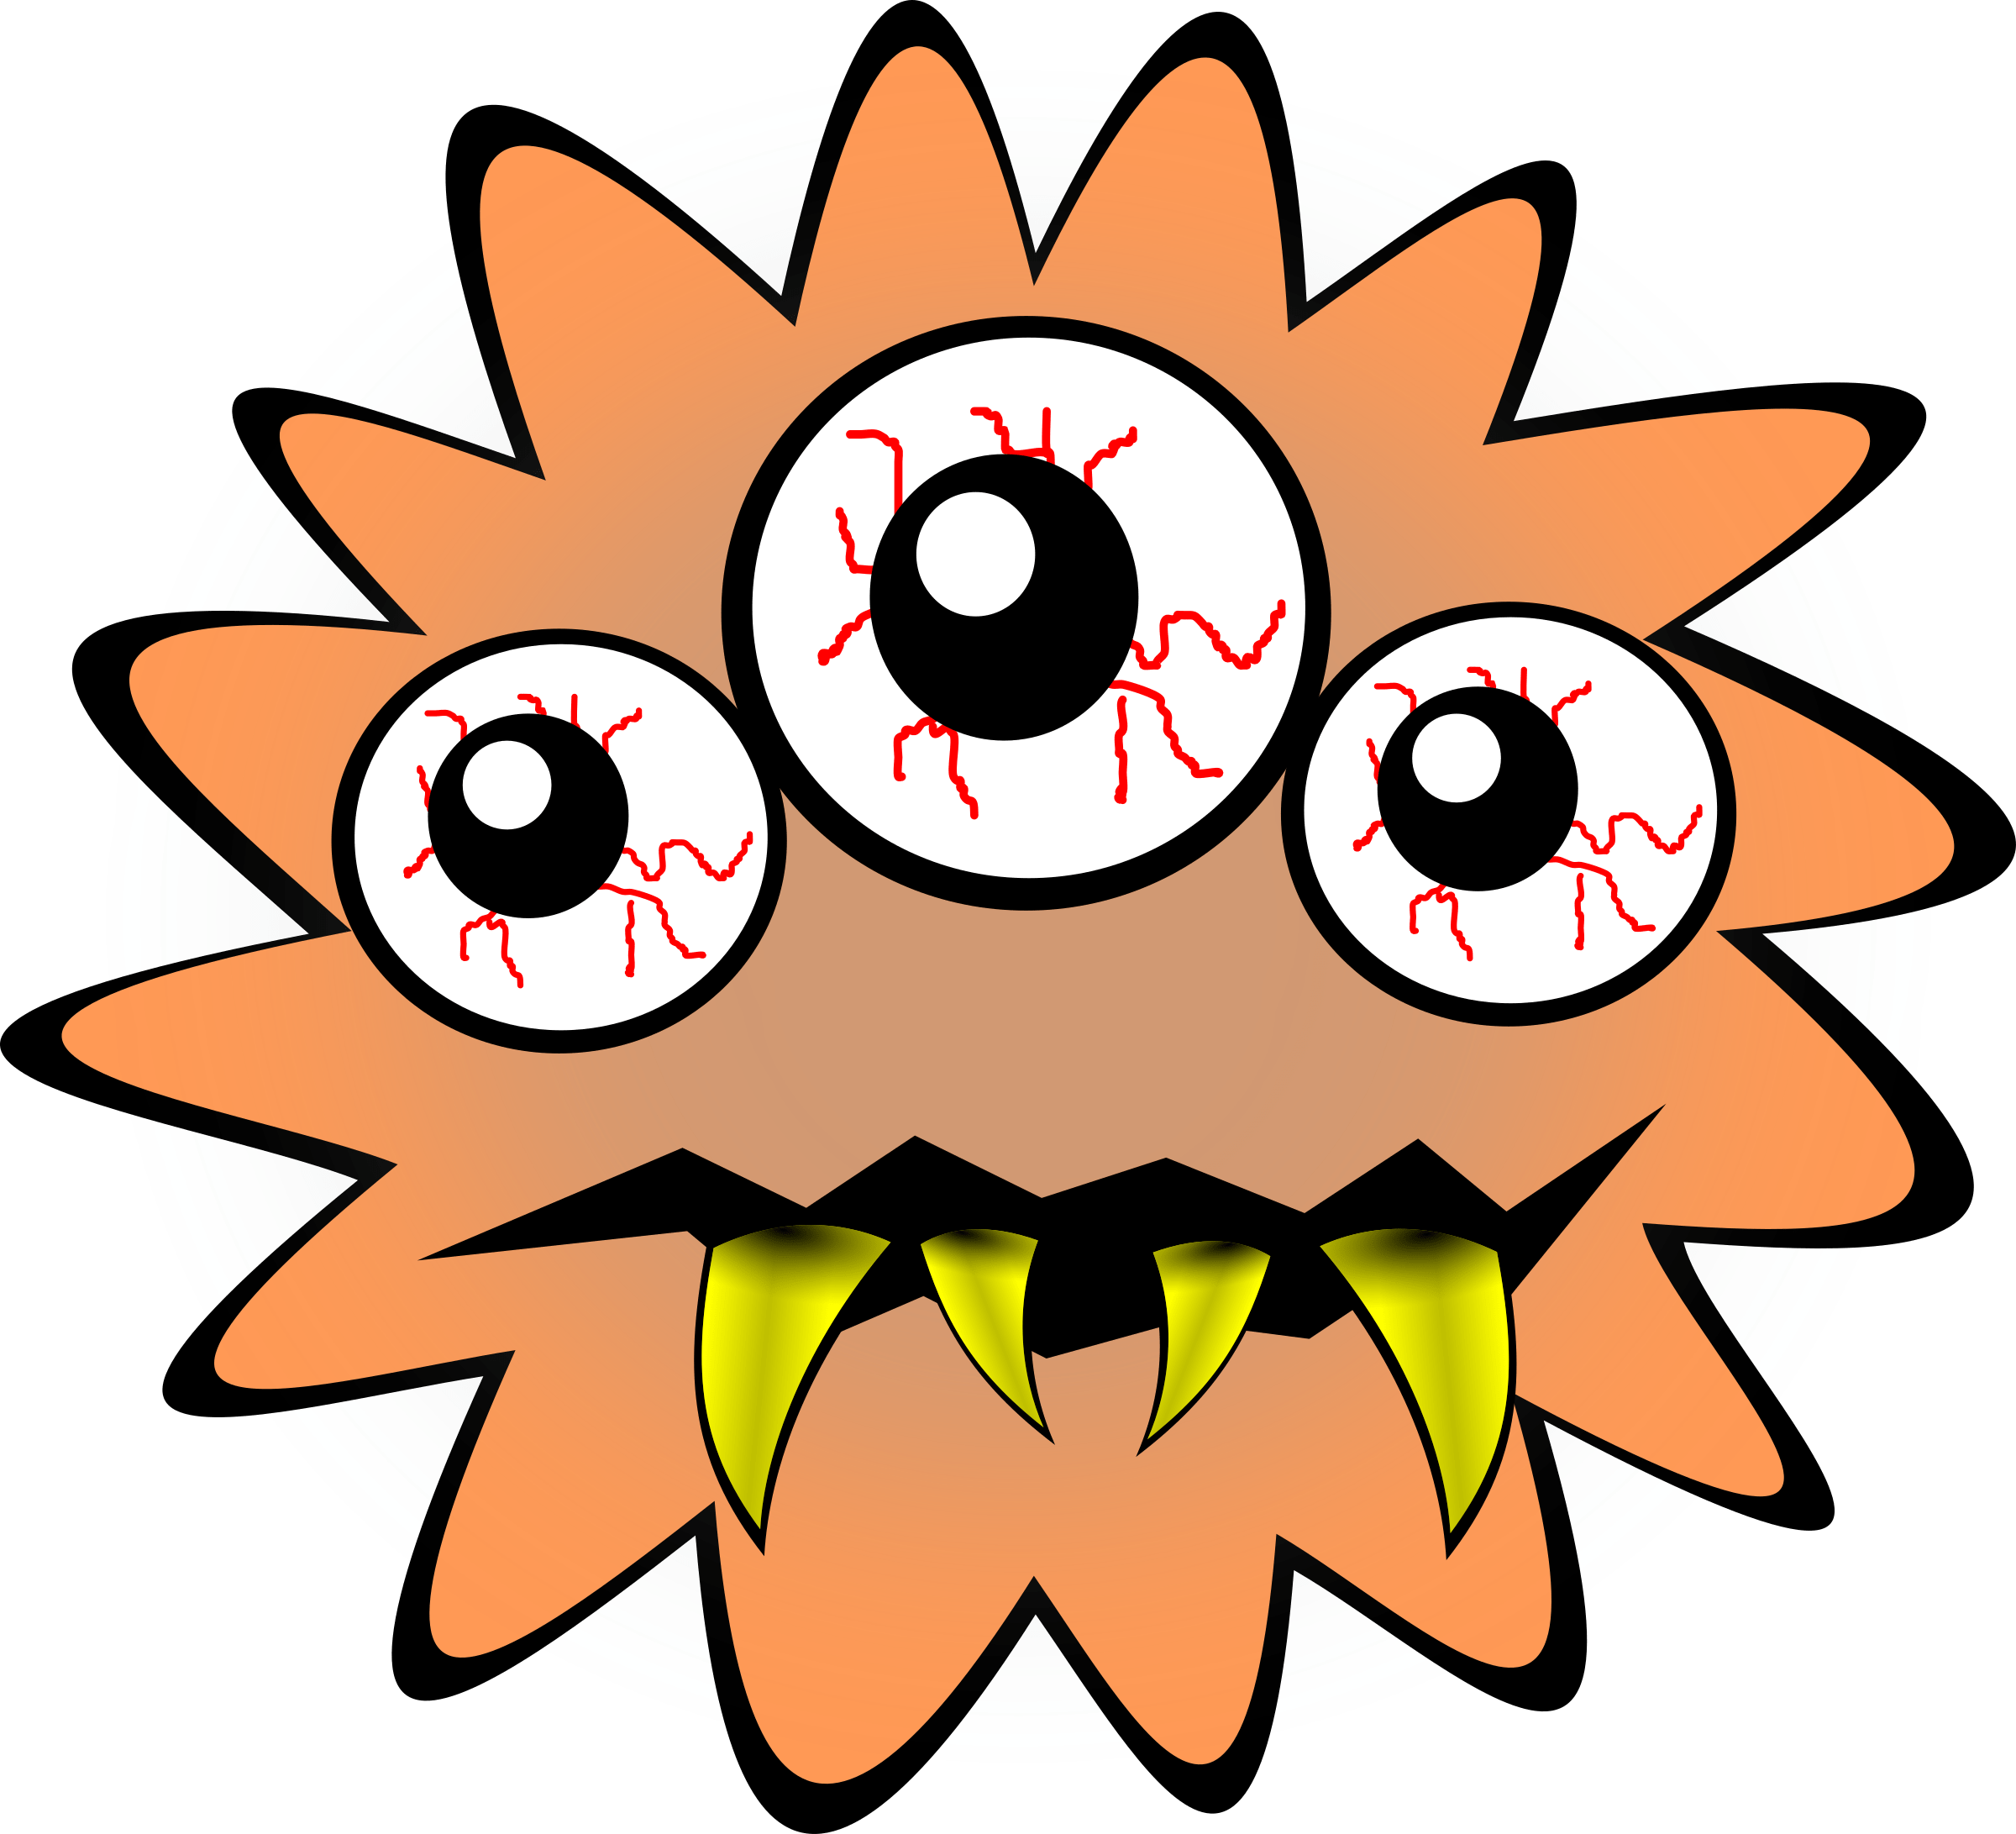 A Cartoon Monster With Three Eyes And Teeth